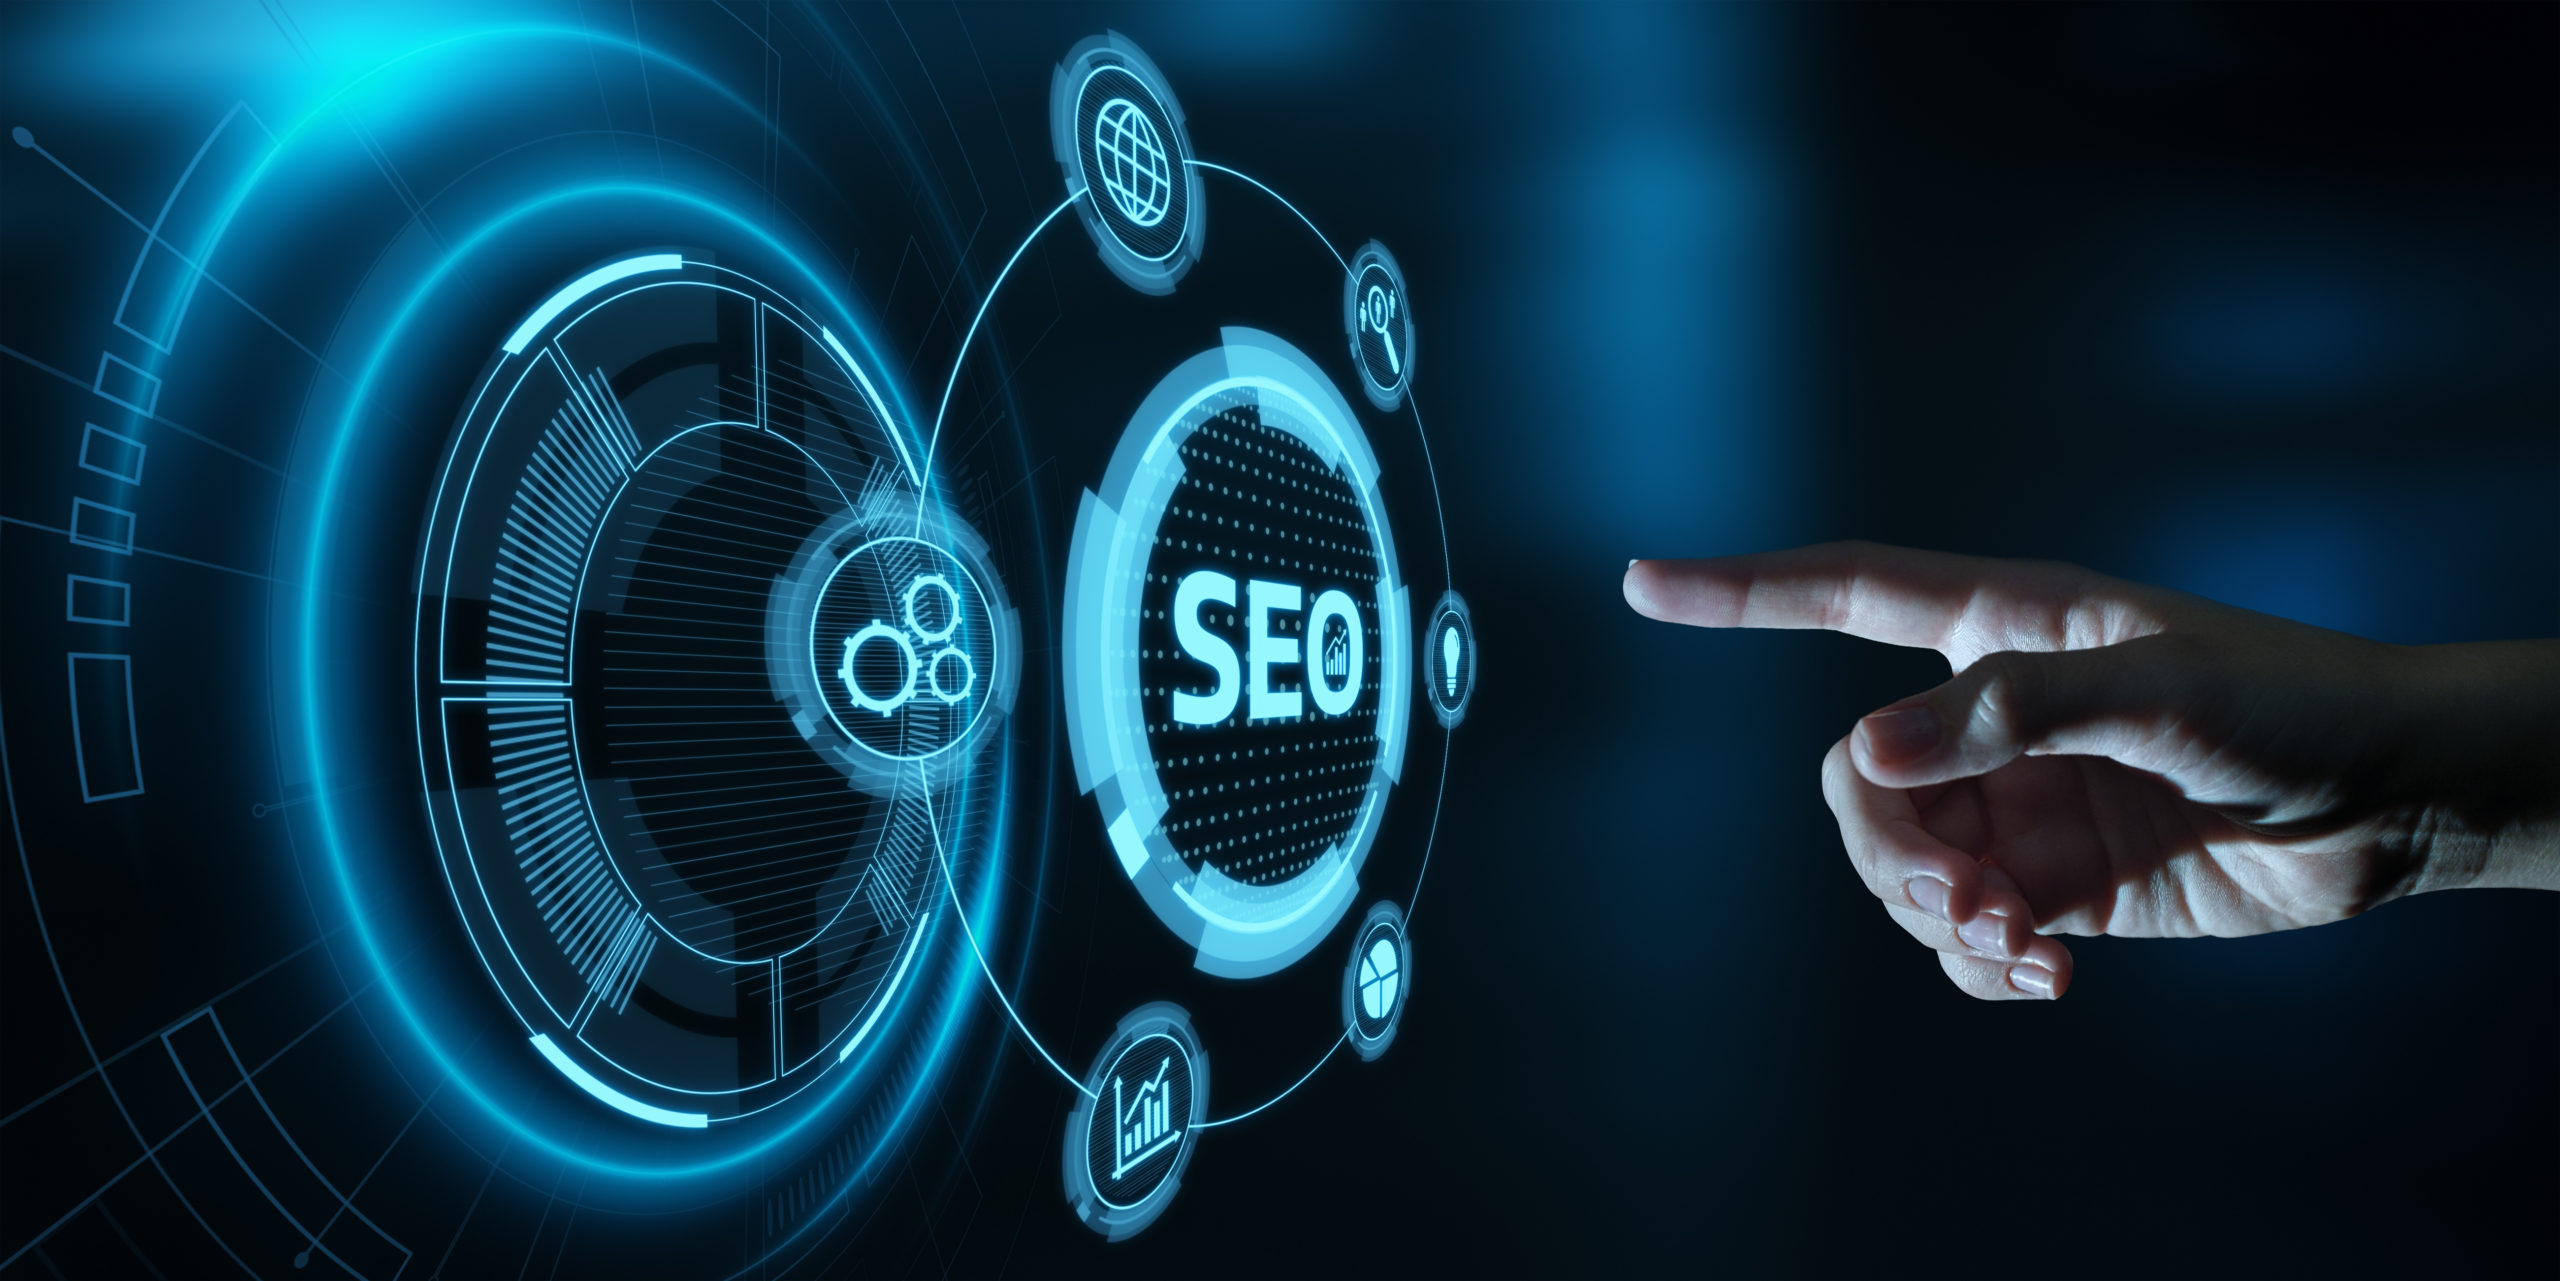 Power of SEO and its basic services